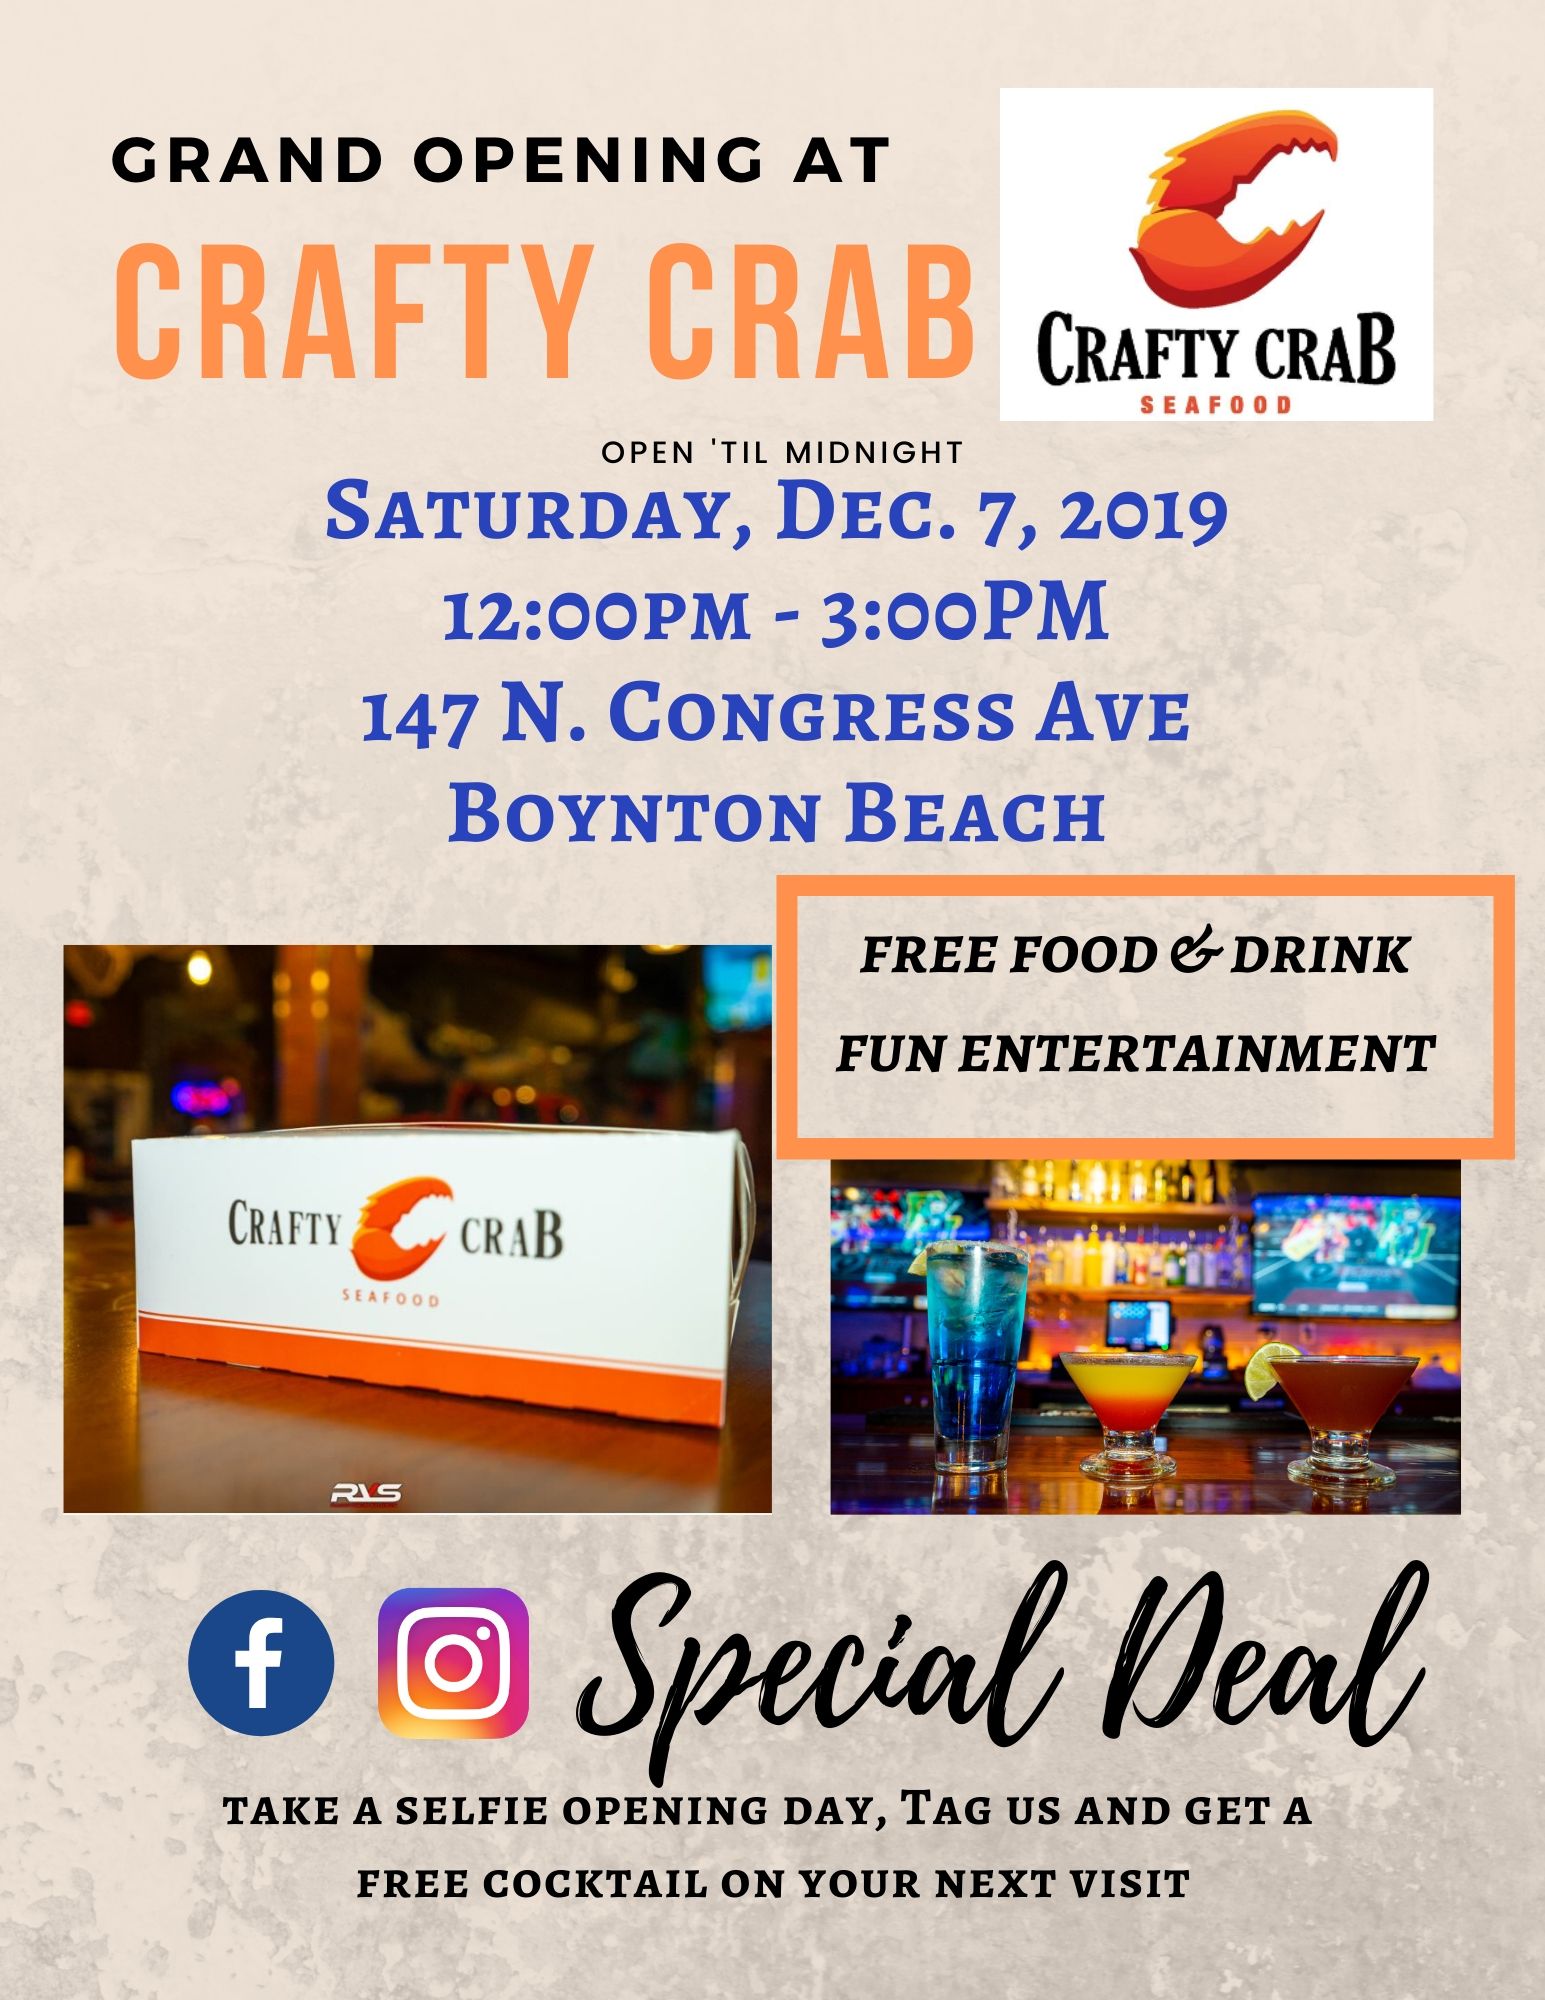 Crafty Crab Grand Opening 12/7/19 The Soul Of Miami